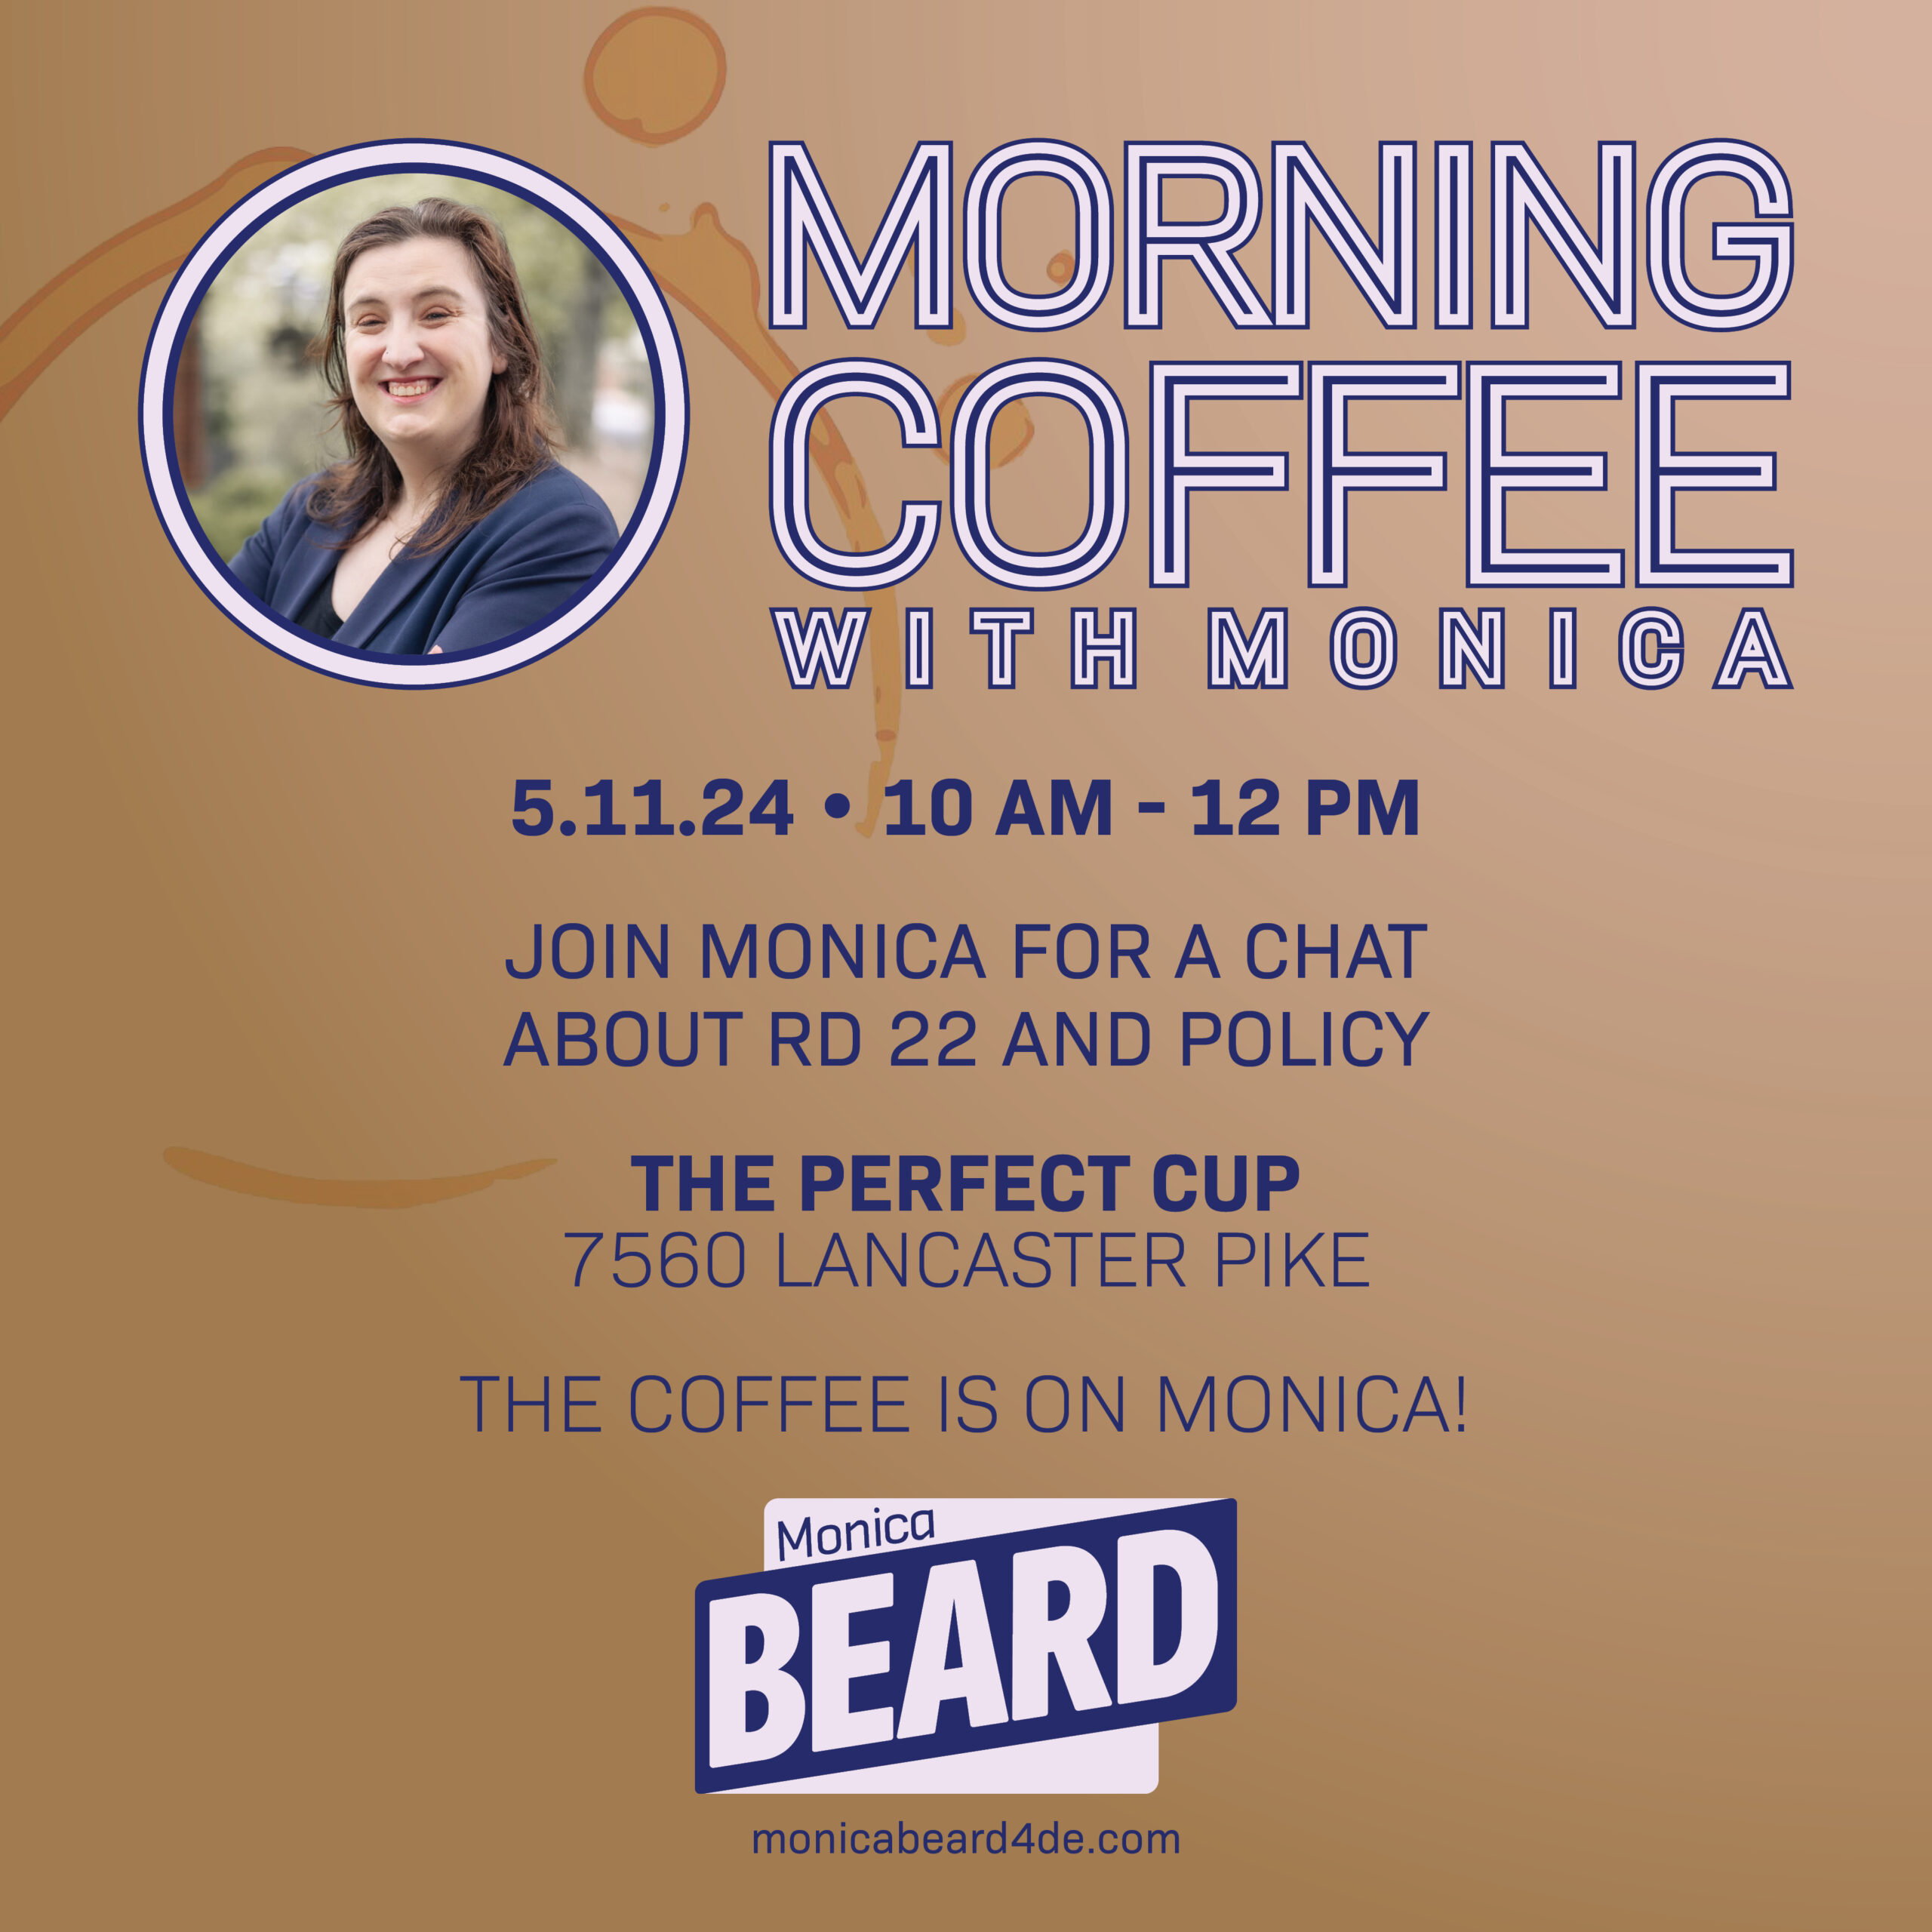 MORNING COFFEE
WITH MONICA
5.11.24 • 10 AM - 12 PM
JOIN MONICA FOR A CHAT ABOUT RD 22 AND POLICY
THE PERFECT CUP
7560 LANCASTER PIKE
THE COFFEE IS ON MONICA!
Monica
BEARD
monicabeard4de.com